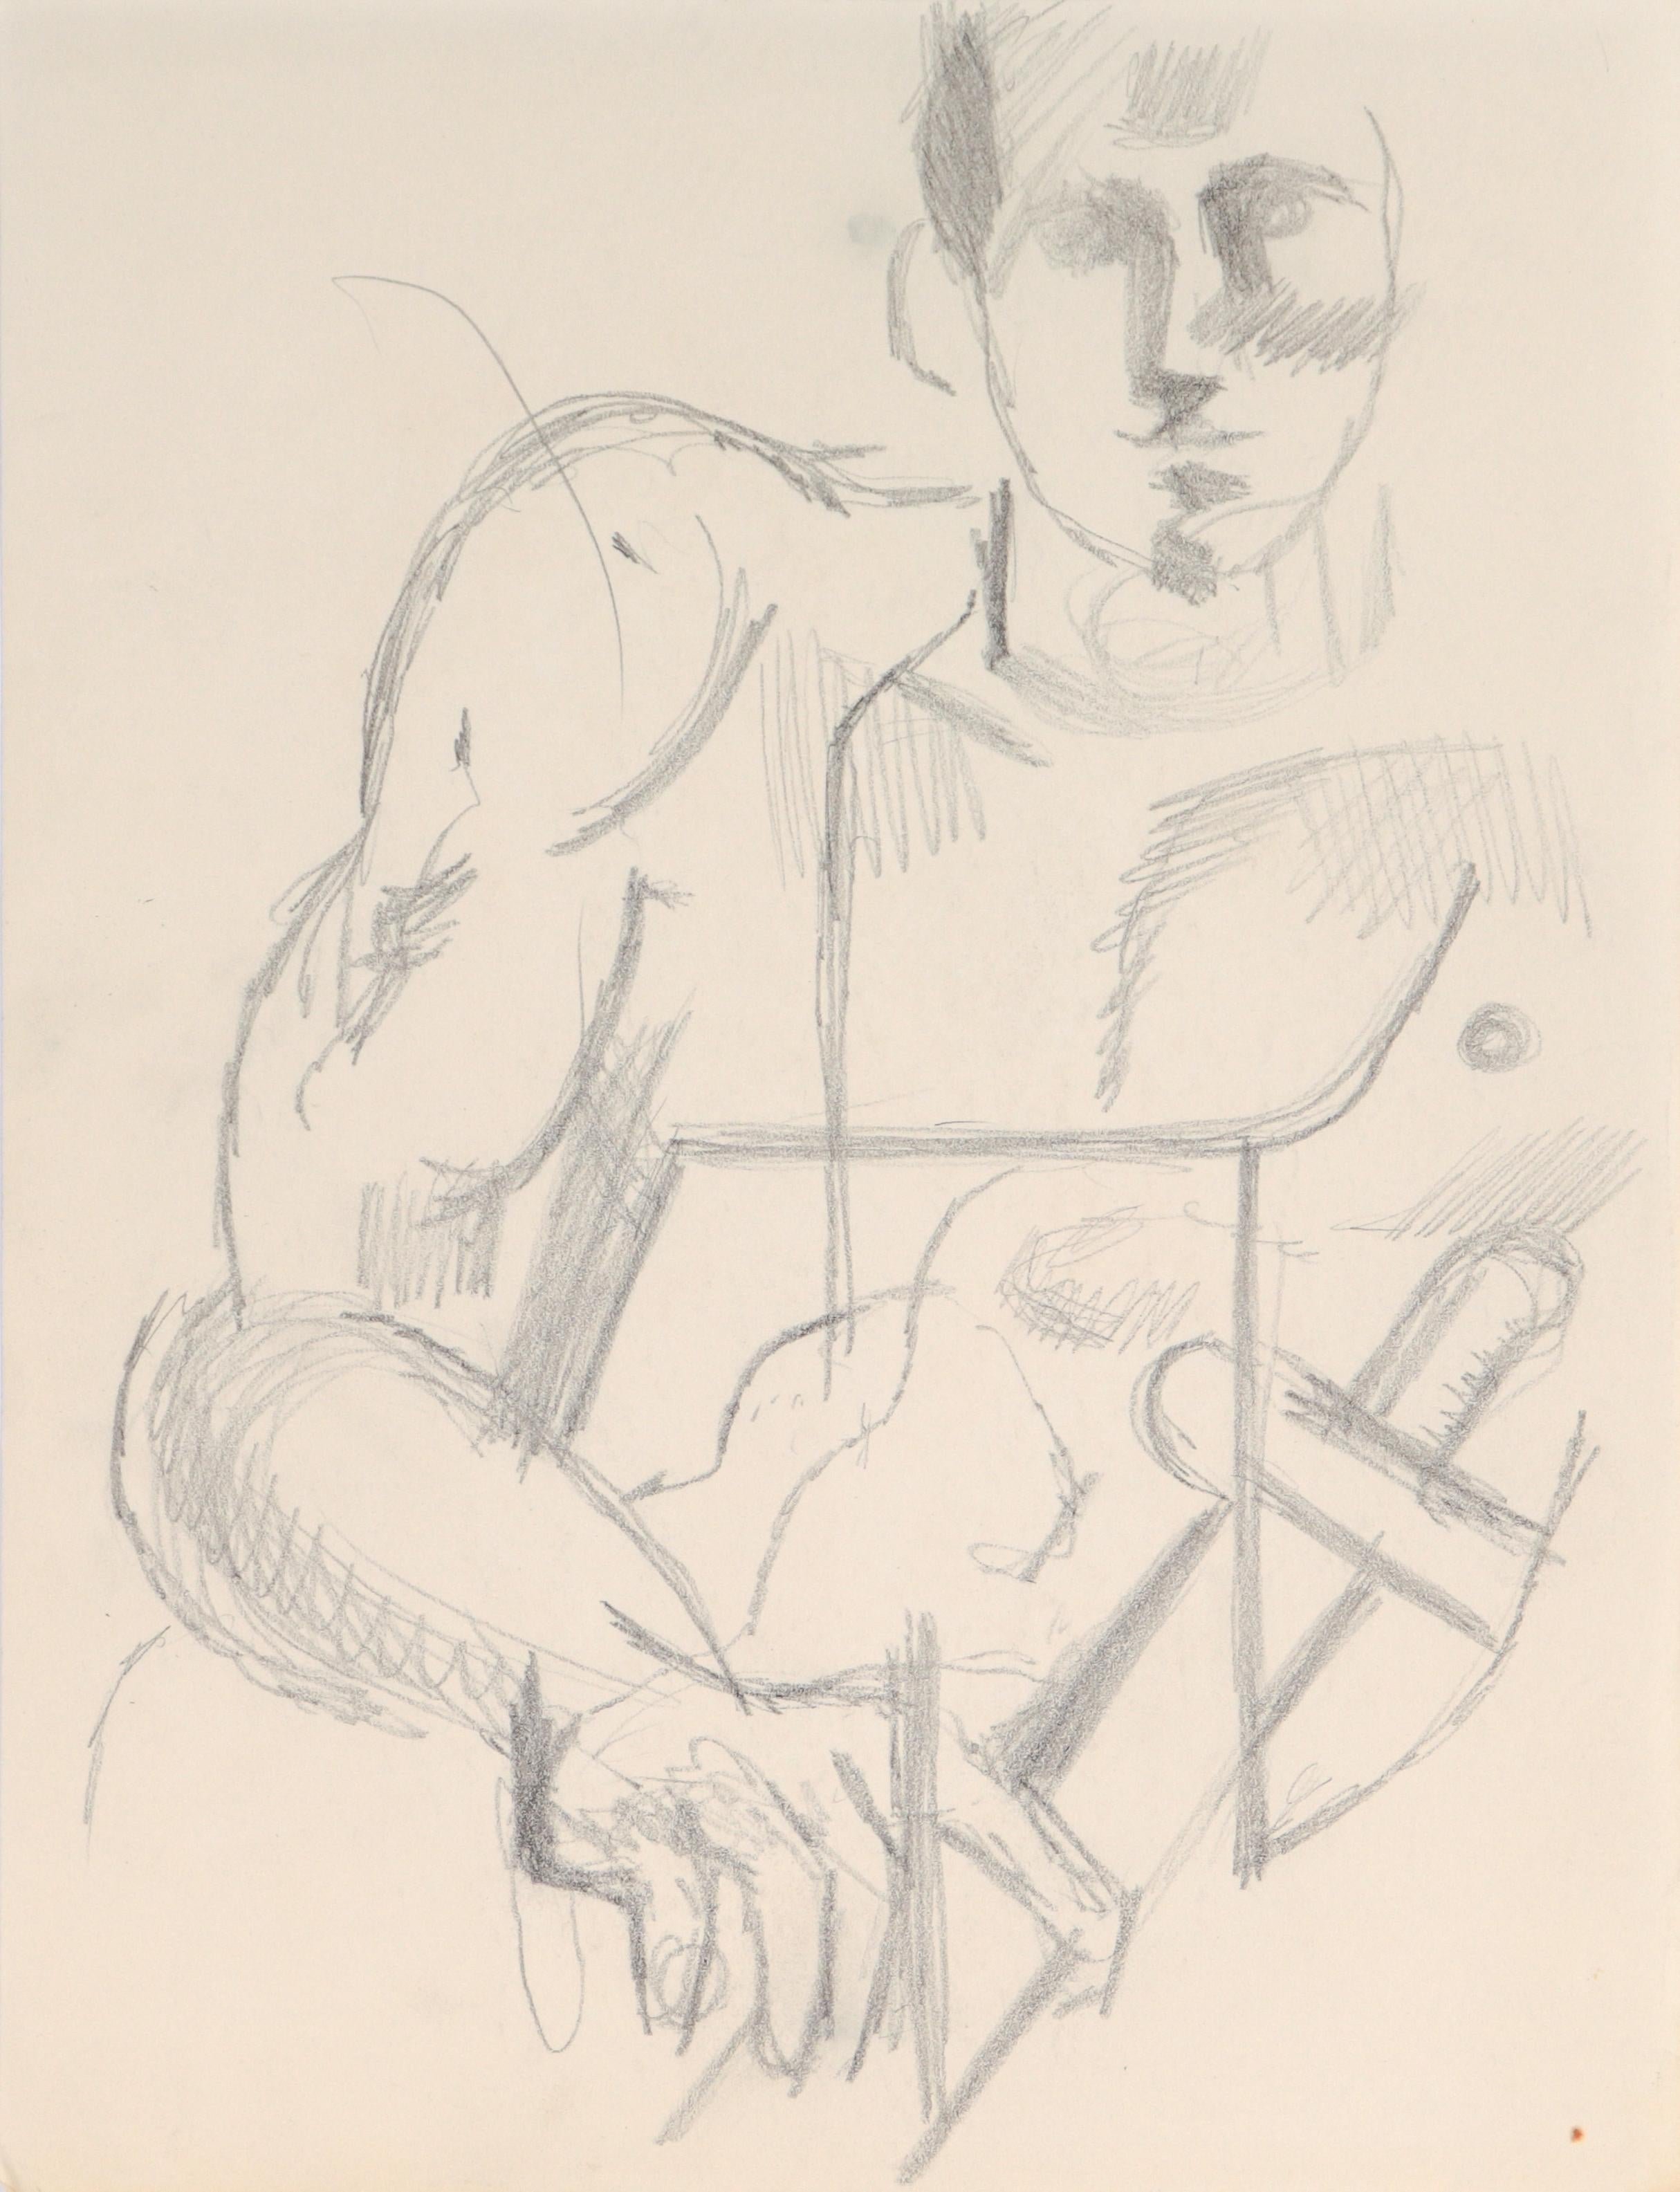 Richard Caldwell Brewer Figurative Art - Abstracted Gazing Figure Mid 20th Century Graphite